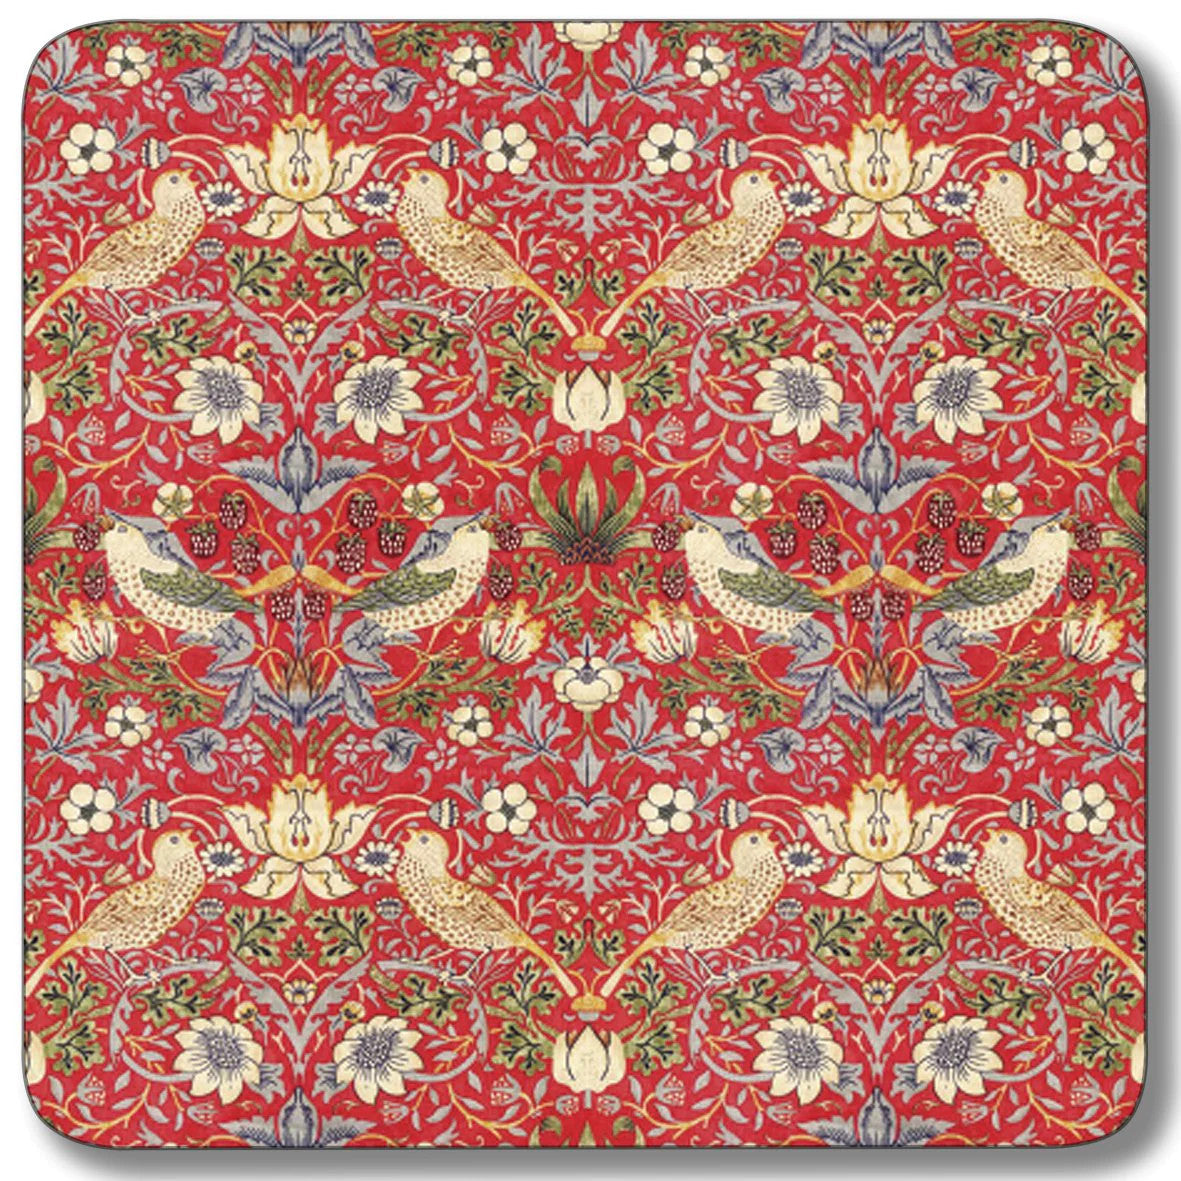 William Morris Strawberry Thief Red Coaster by Customworks.